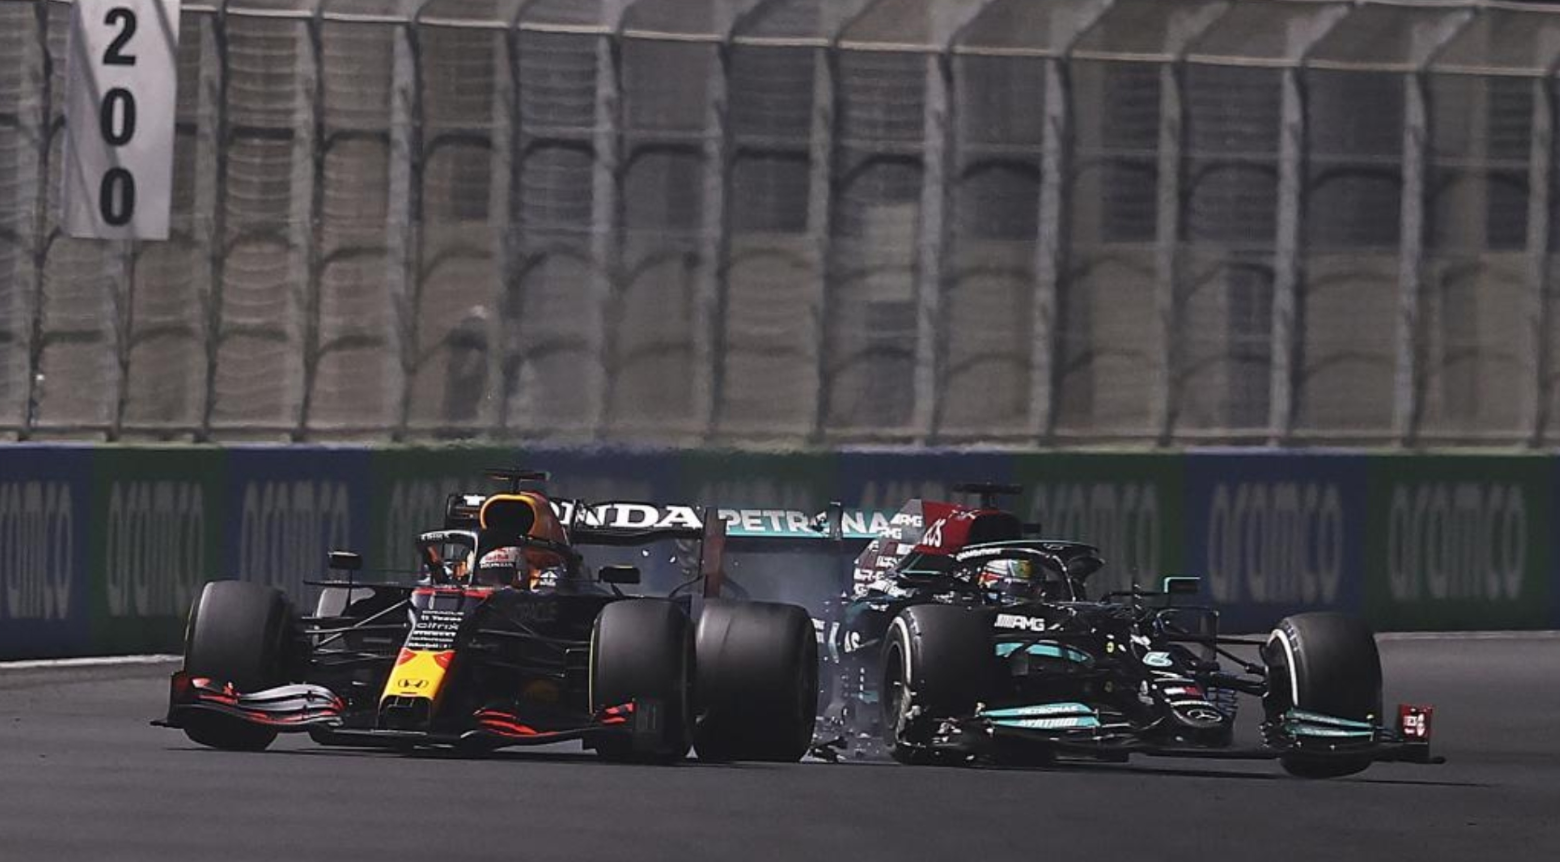 Max Verstappen and Lewis Hamilton crash into each other during F1 Saudi Arabia 2021